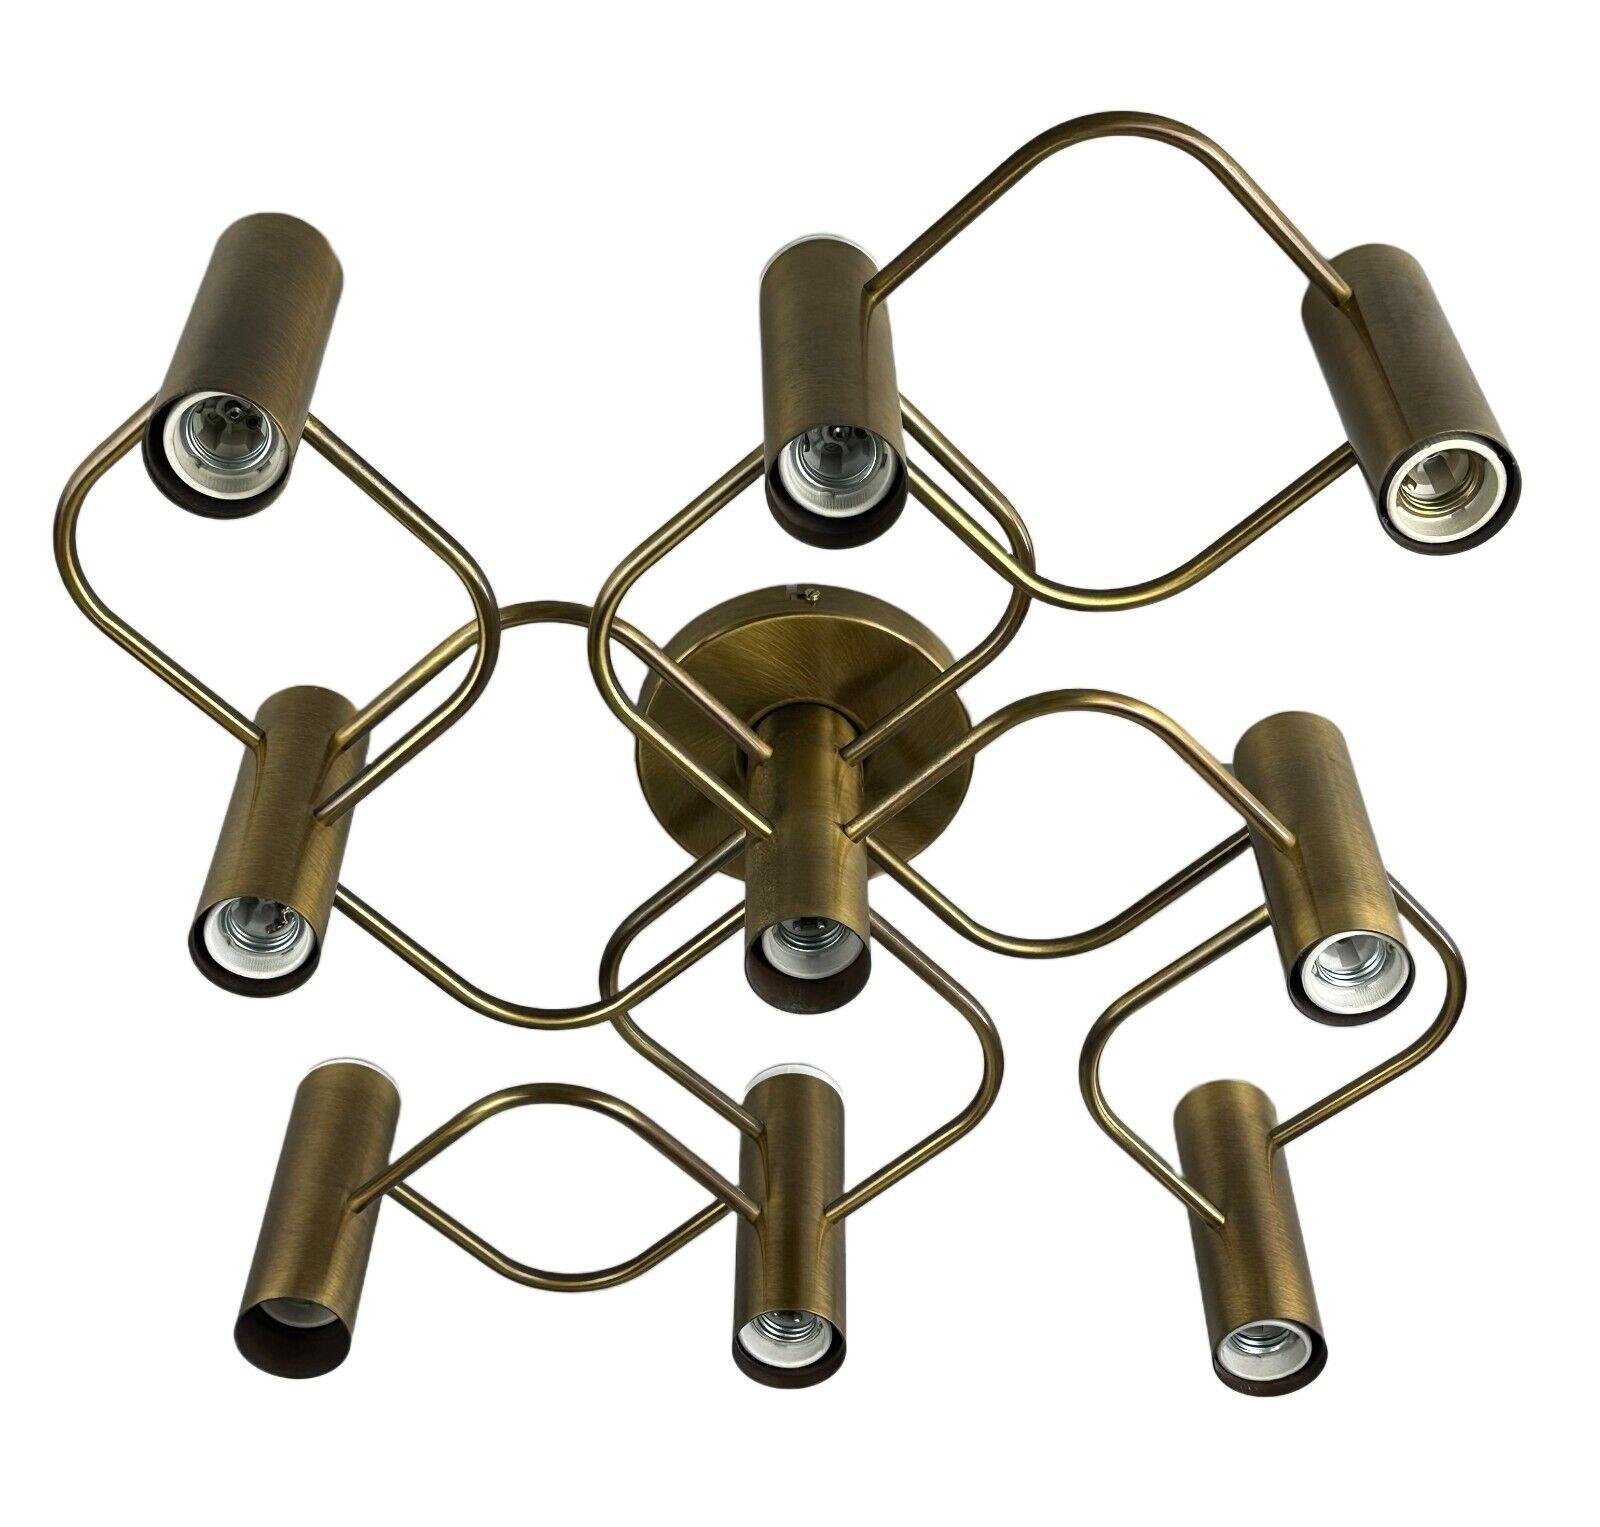 60s 70s ceiling lamp wall lamp Leola Leuchten Germany brass Space Age

Object: ceiling lamp

Manufacturer: Leola Lights

Condition: good

Age: around 1960-1970

Dimensions:

Width = 60cm
Depth = 60cm
Height = 17cm

Other notes:

9x E27 socket

The